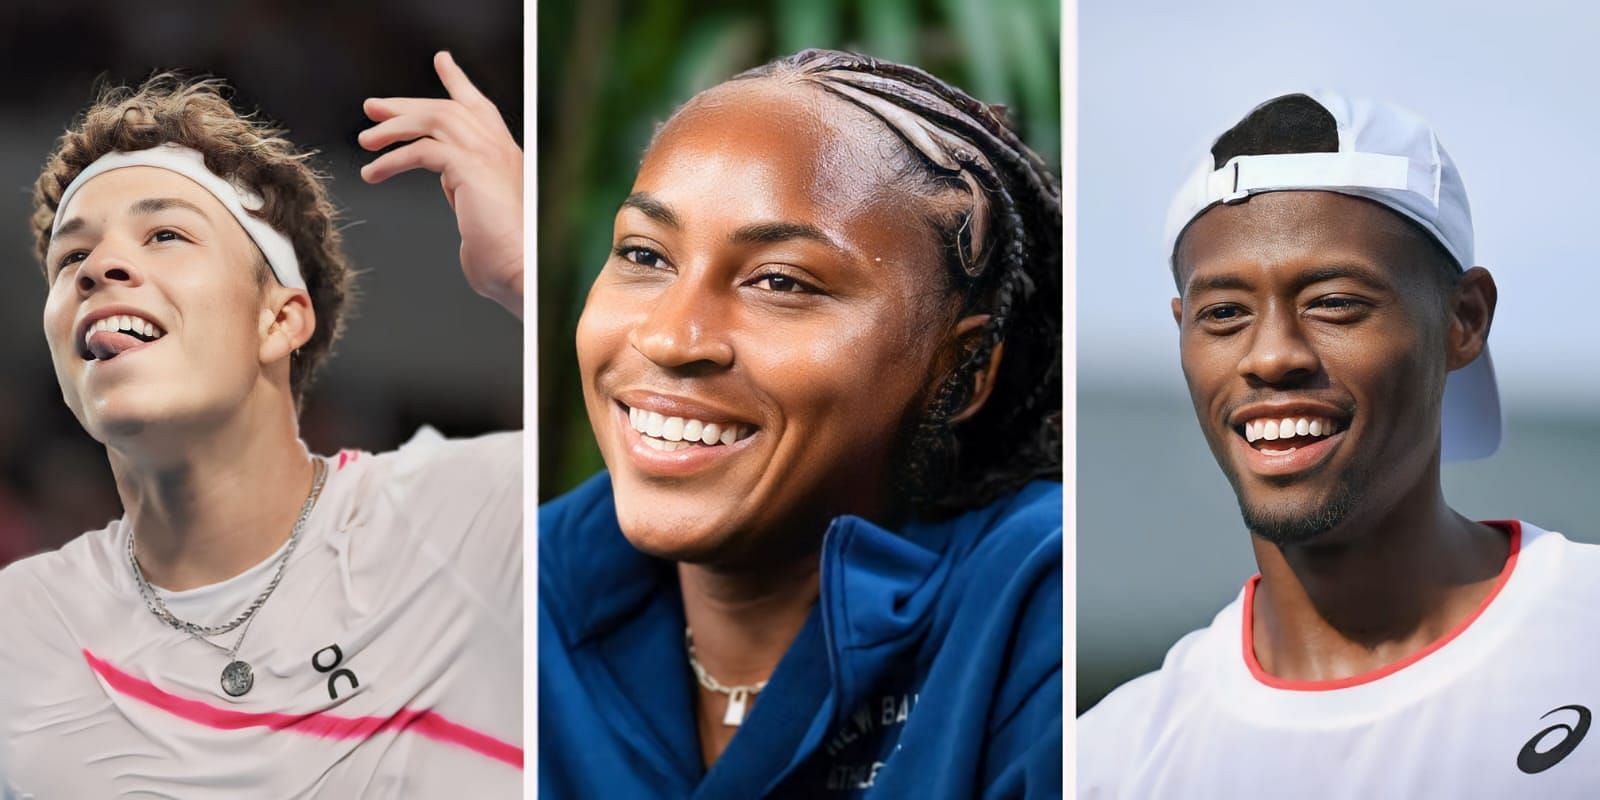 “Escape room goats” - Ben Shelton gives a peek into his adventures with Coco Gauff and Christopher Eubanks ahead of Miami Open